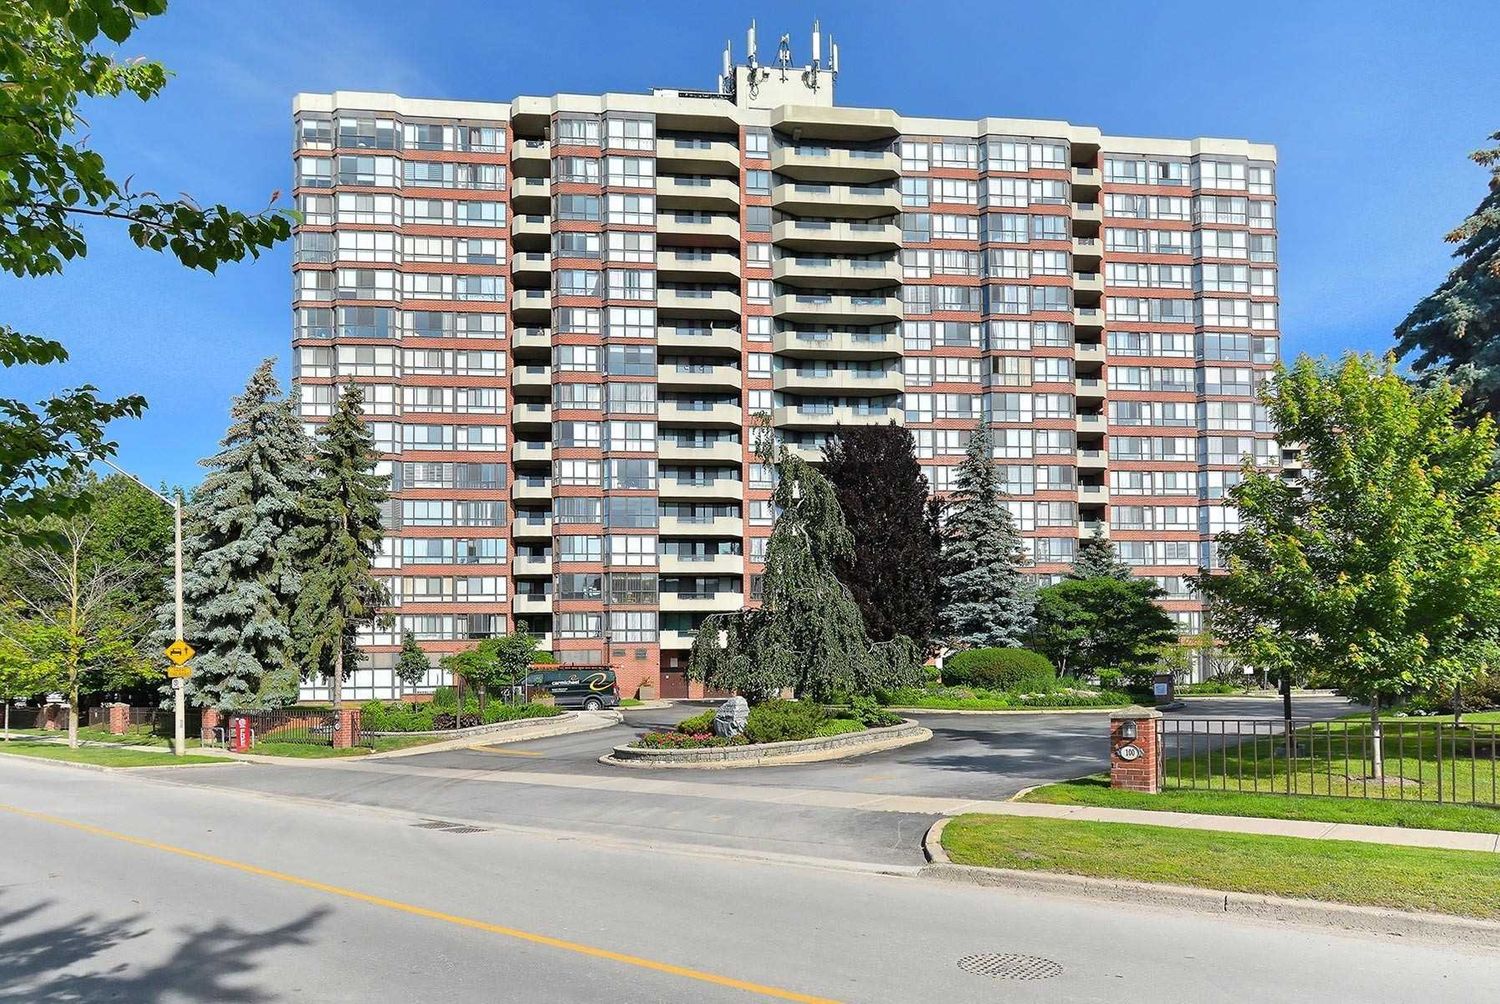 100 Observatory Lane. Observatory Lane Condo is located in  Richmond Hill, Toronto - image #1 of 3